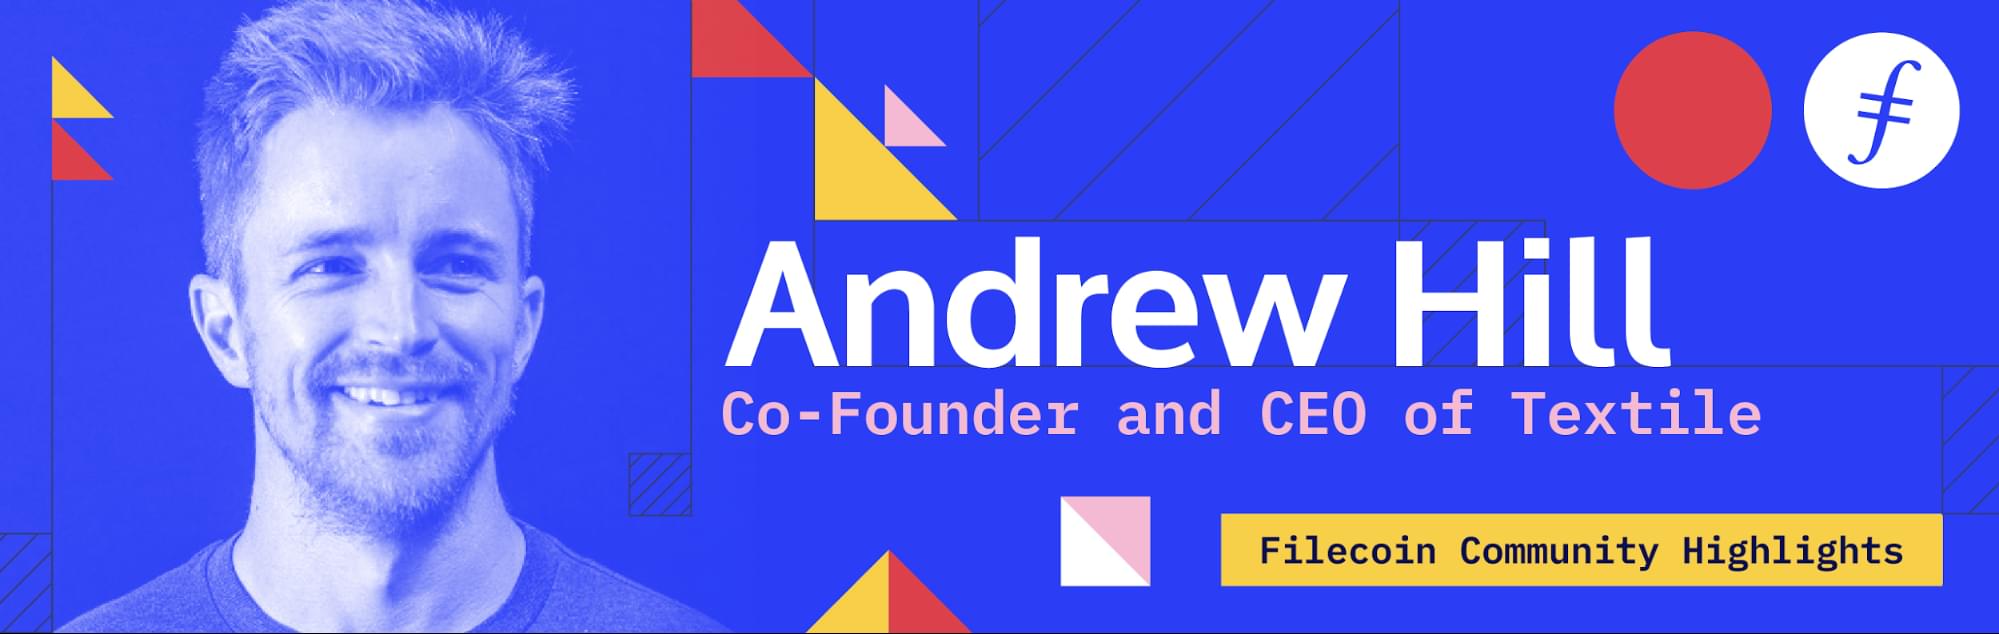 Meet Andrew Hill, Co-Founder and CEO of Textile